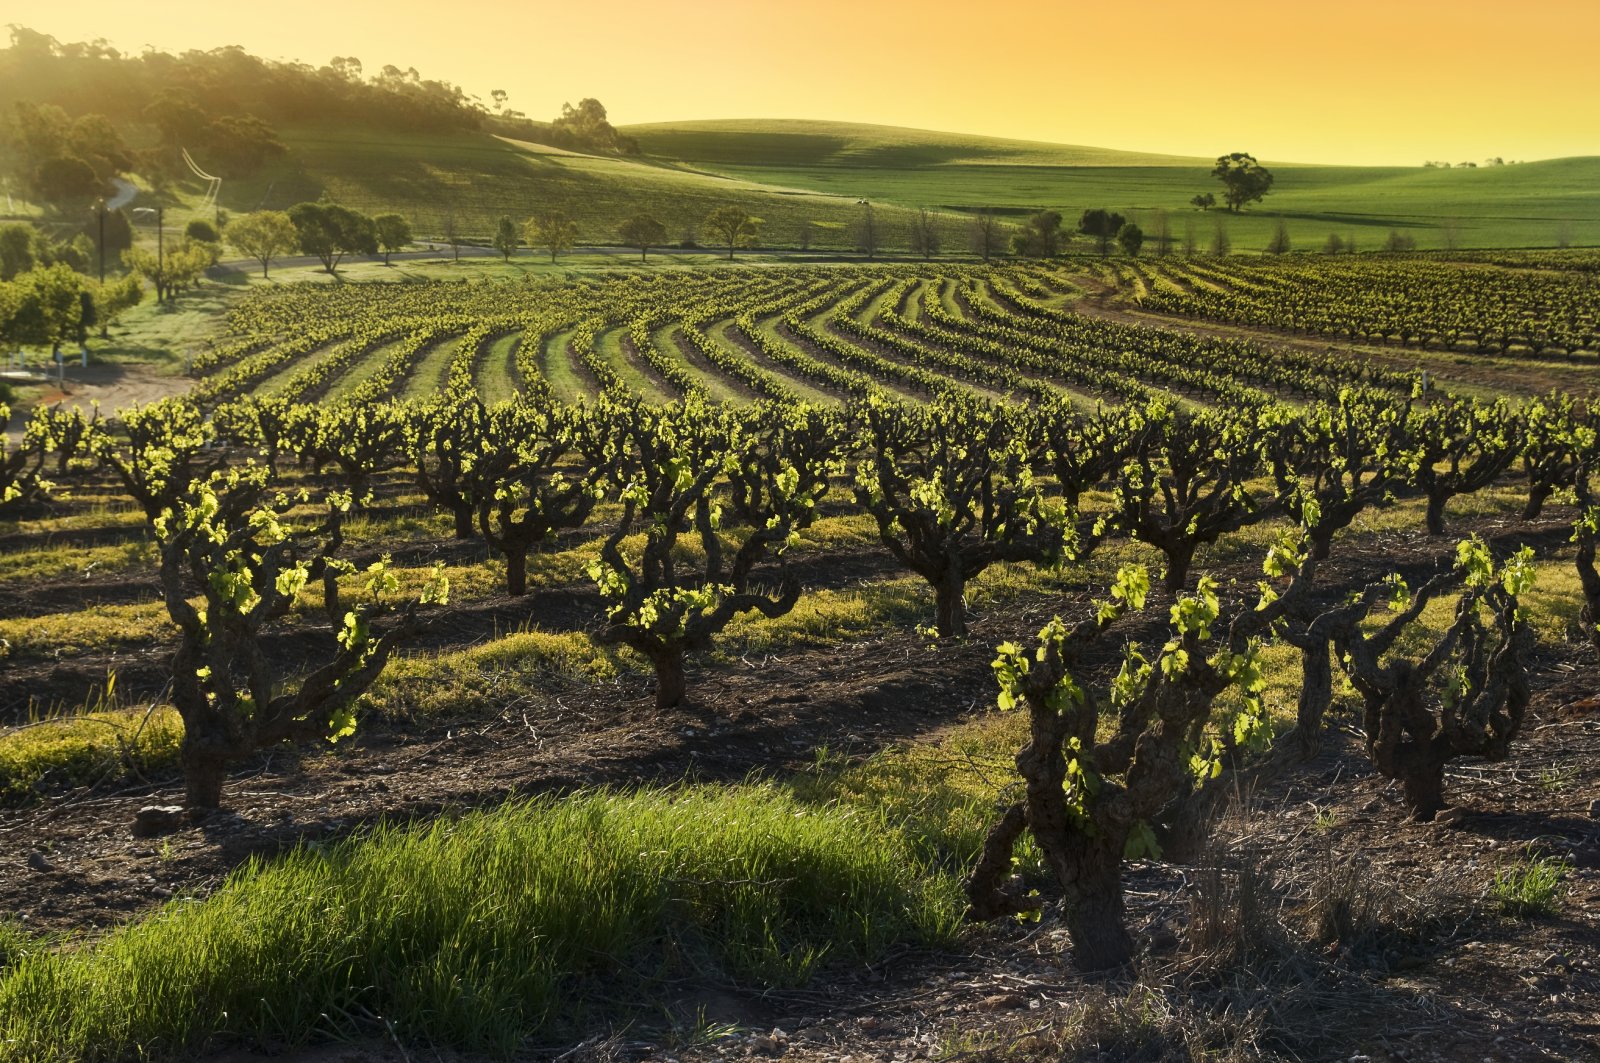 <p class="wp-caption-text">Image Credit: Shutterstock / hddigital</p>  <p><span>The Barossa Valley, just an hour’s drive from Adelaide, is one of Australia’s oldest and most renowned wine regions. Home to over 150 wineries and cellar doors, the area is celebrated for its Shiraz, among other varietals. The Barossa Valley combines its wine heritage with a burgeoning food scene, featuring farm-to-table dining, artisanal cheese, and locally sourced produce. The landscape is characterized by rolling hills, vineyard vistas, and historic towns, making it a picturesque and indulgent getaway.</span></p>